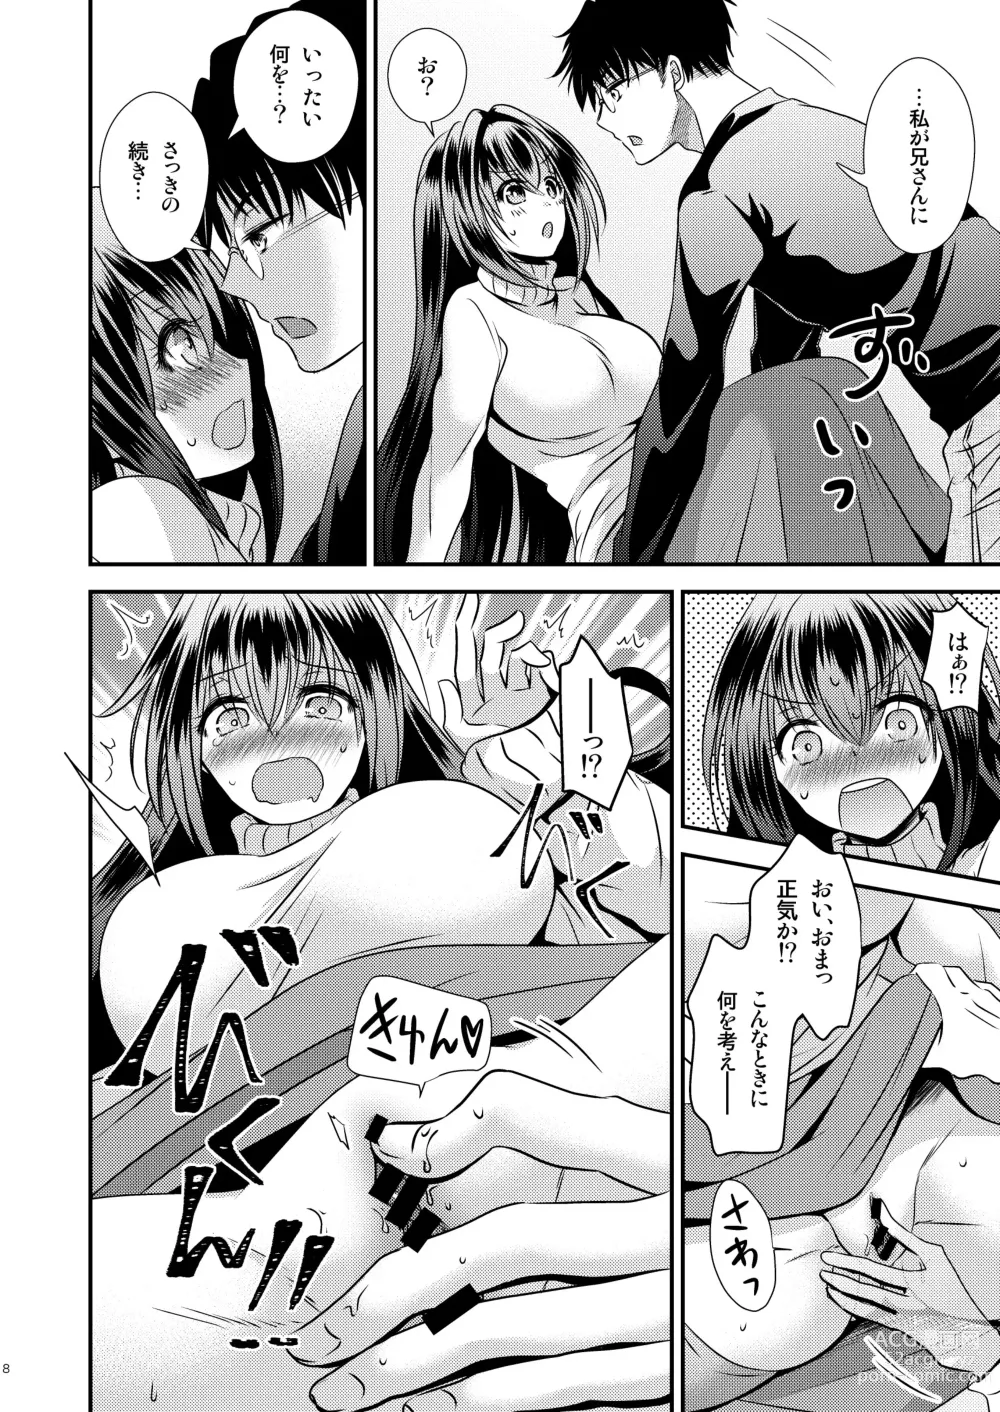 Page 8 of doujinshi 性欲処理に使っていた妹と入れ替わった兄